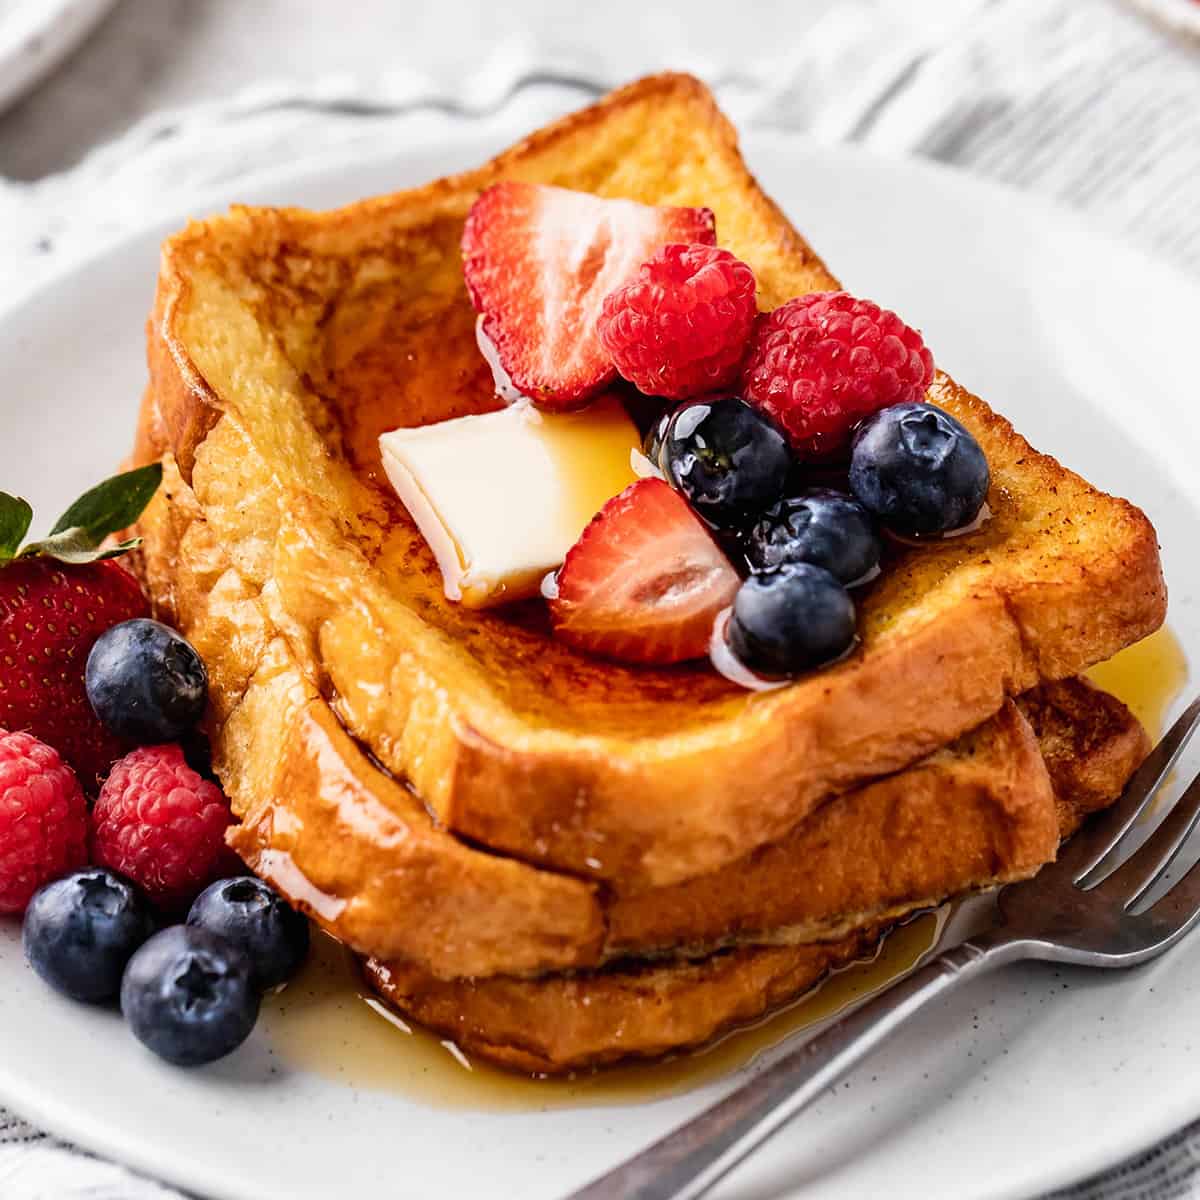 stack of three pieces of french toast on a plate with butter, syrup and berries